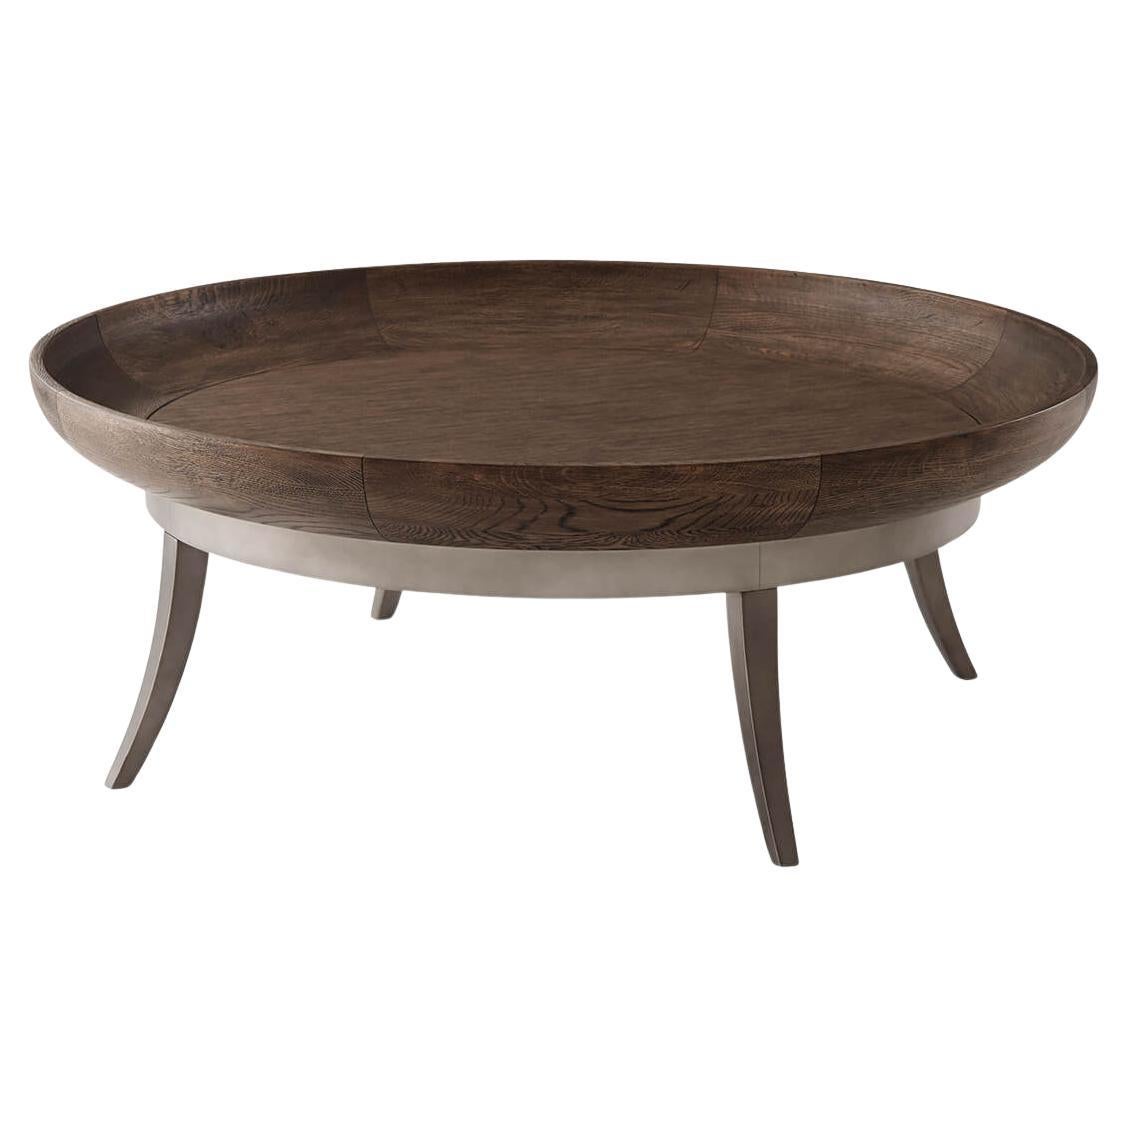 Dark Rimmed Bowl Top Coffee Table For Sale